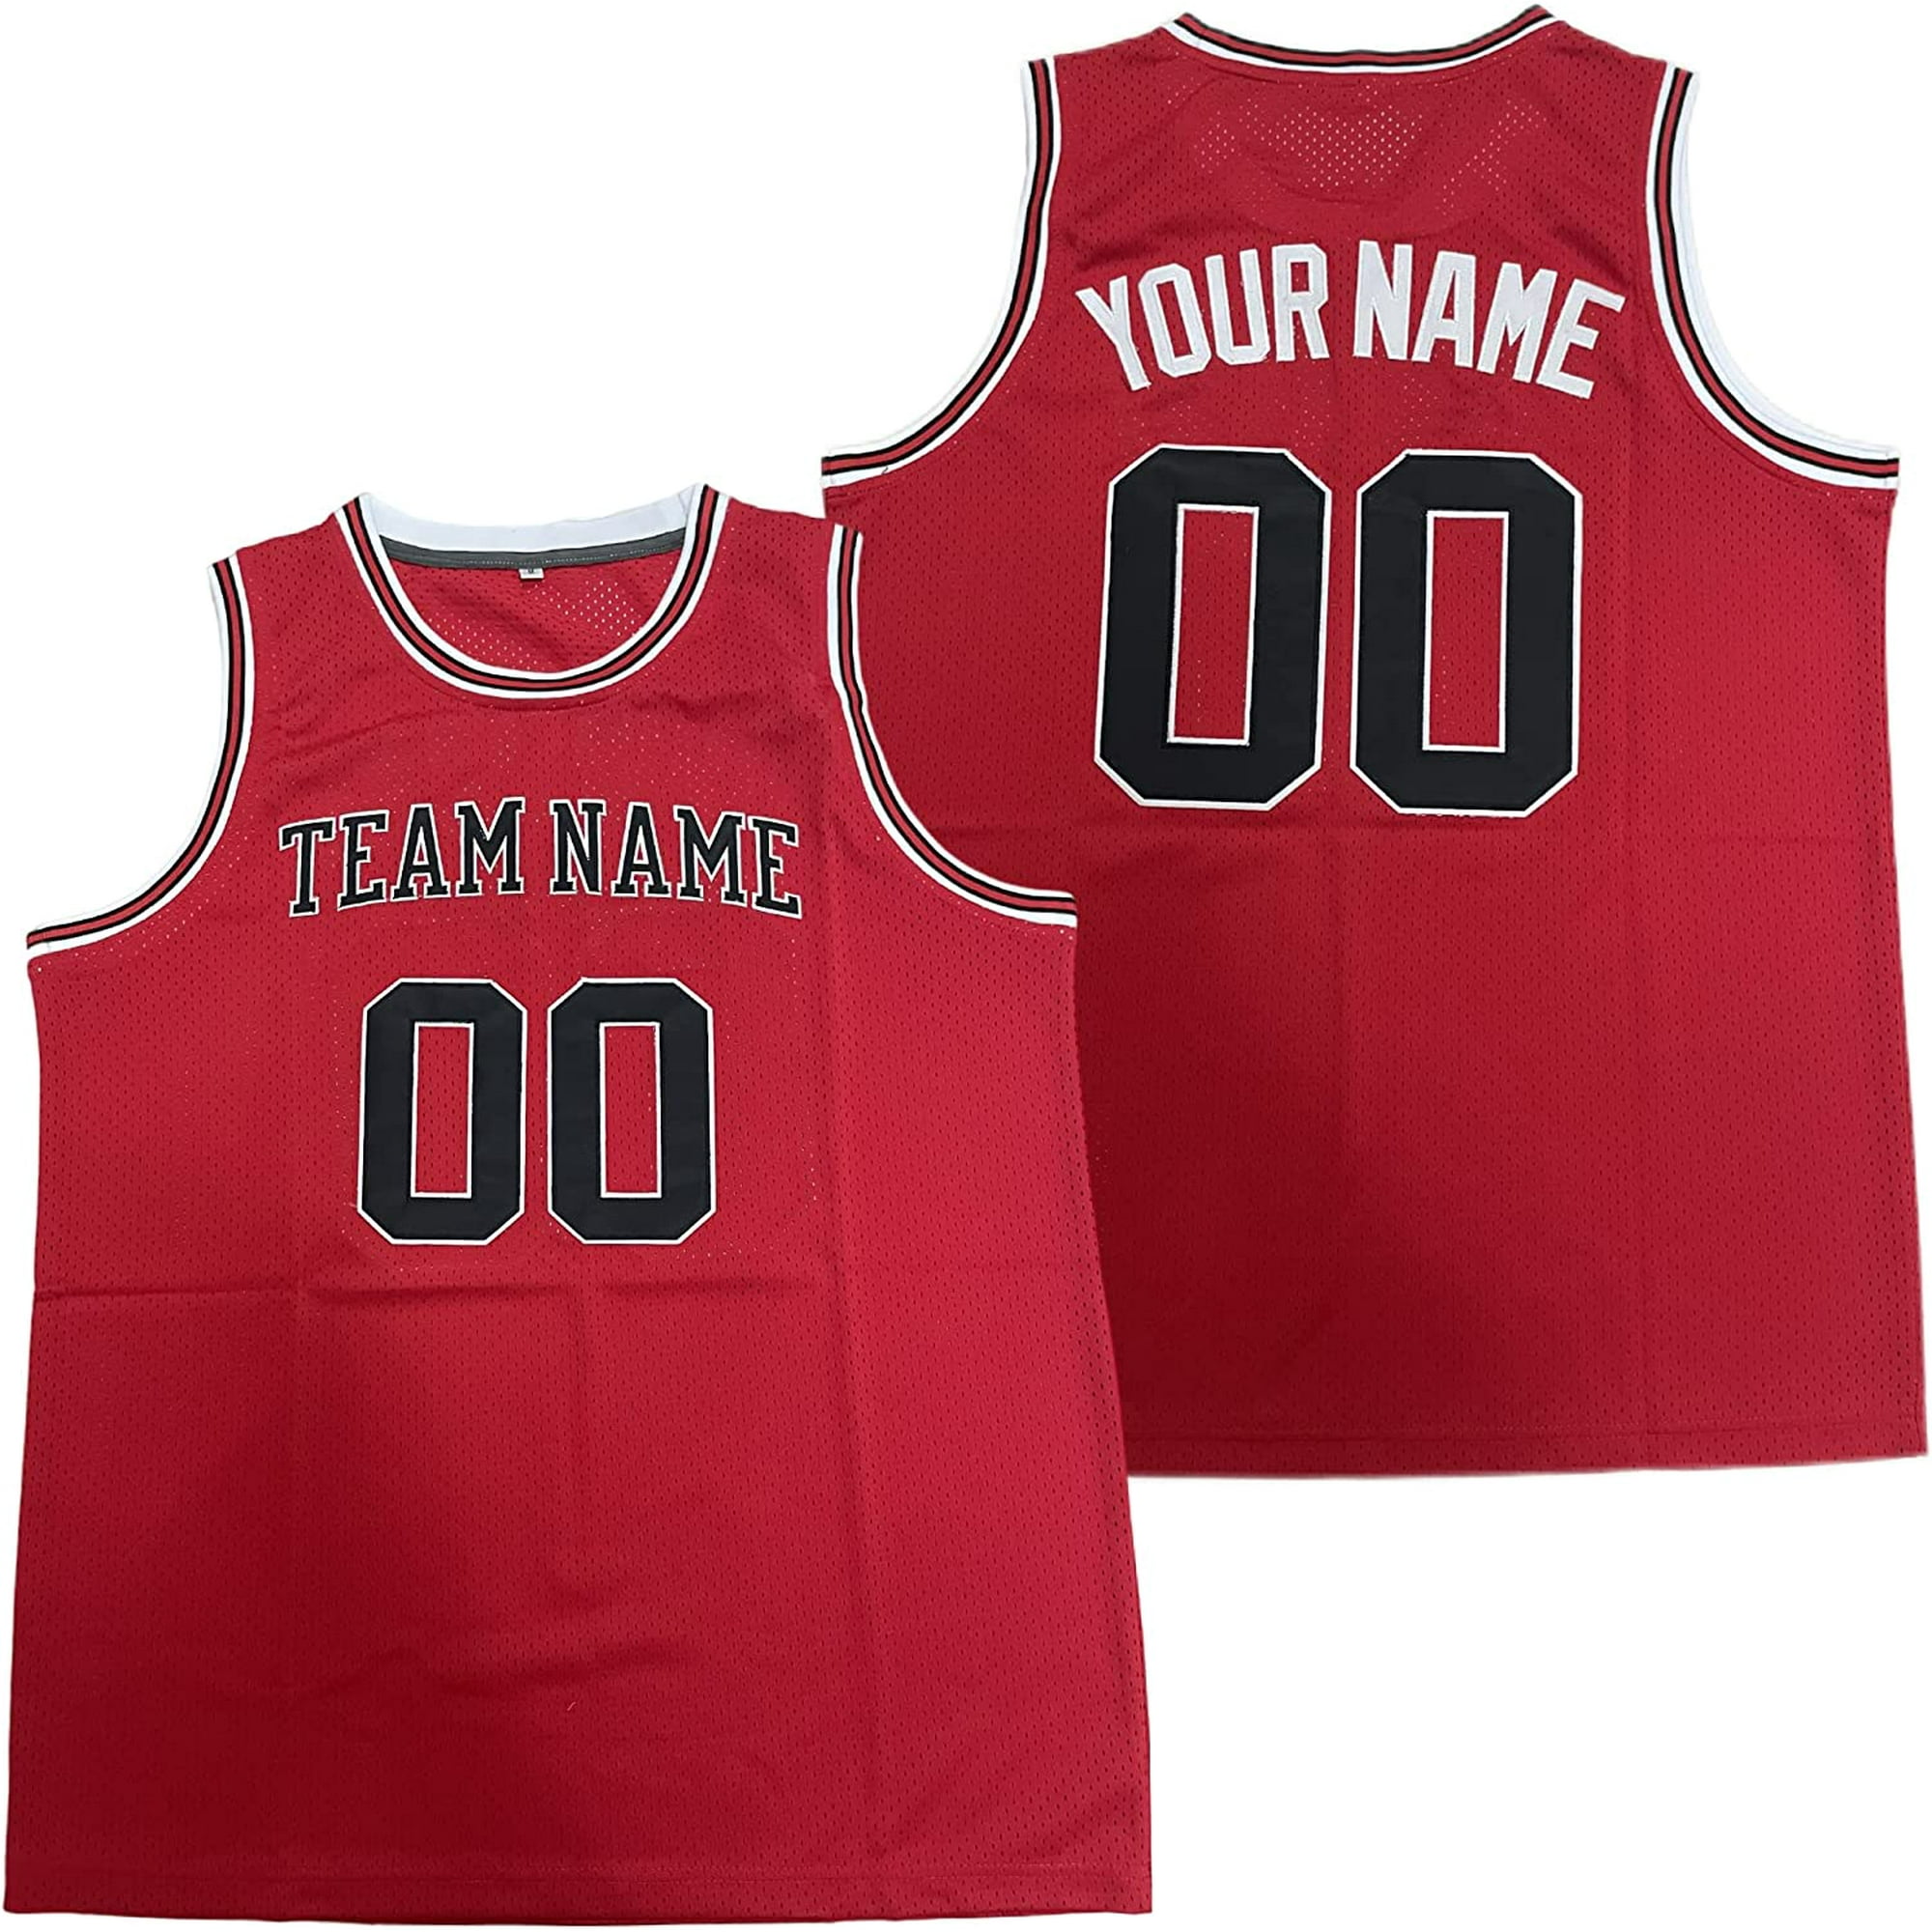 Your Team Men's Custom Stitched Basketball Jersey Stitched Top Tank Breathable Shirt Red 4XL